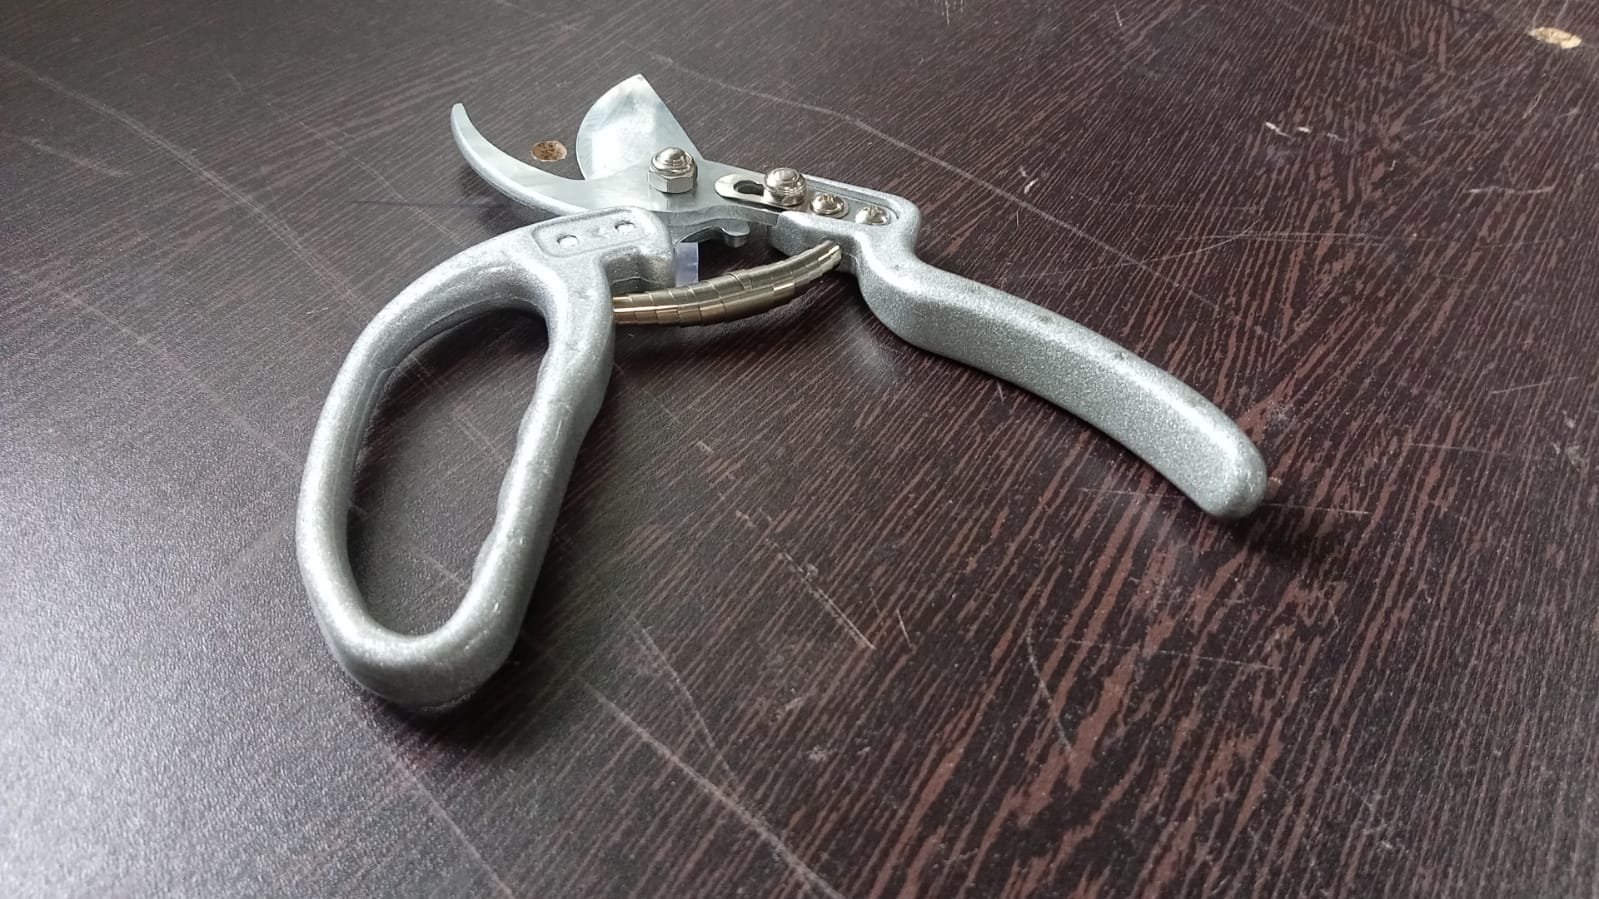 Pruning Shear Cutter for All Purpose Garden Use